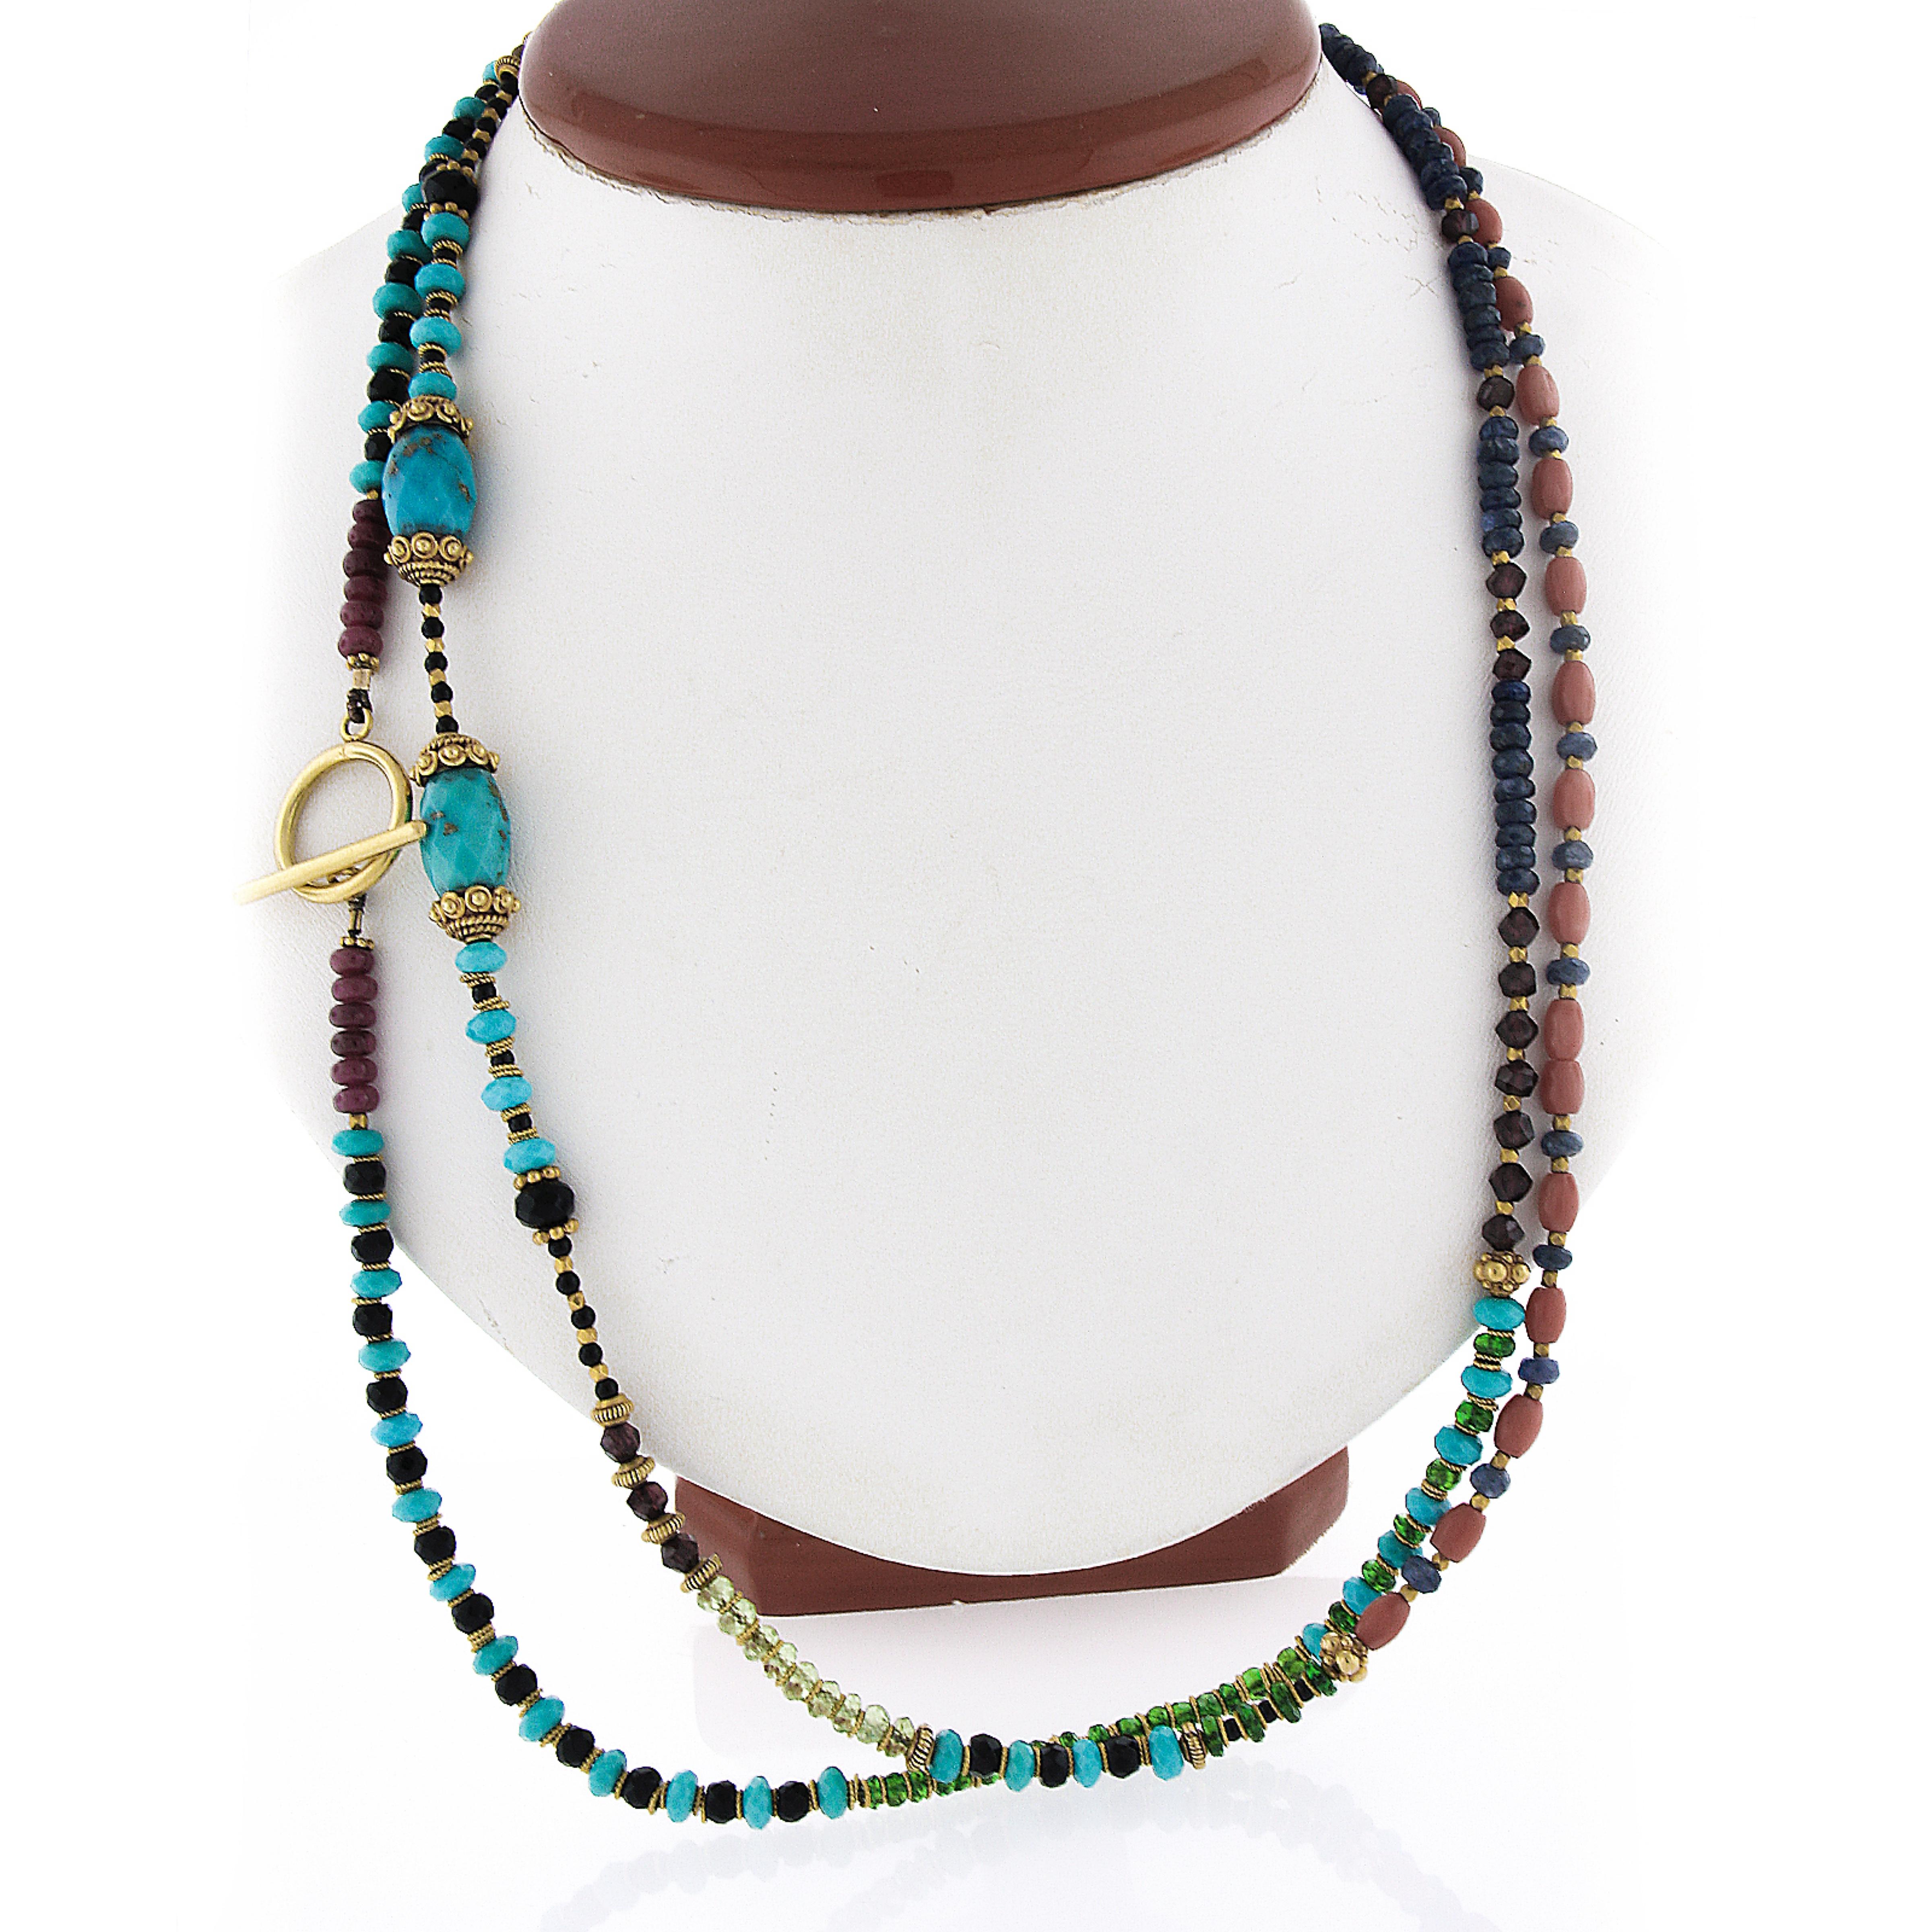 --Stone(s):--
Numerous Natural Genuine Multicolor Stones - Rondell & Faceted Beads Shape - Blue, Green, Black, Orange & Red Colors

Material: String w/ Solid 18k Yellow Gold Beads, Spacers, Caps & Toggle Clasp
Weight: 50.52 Grams
Chain Type: